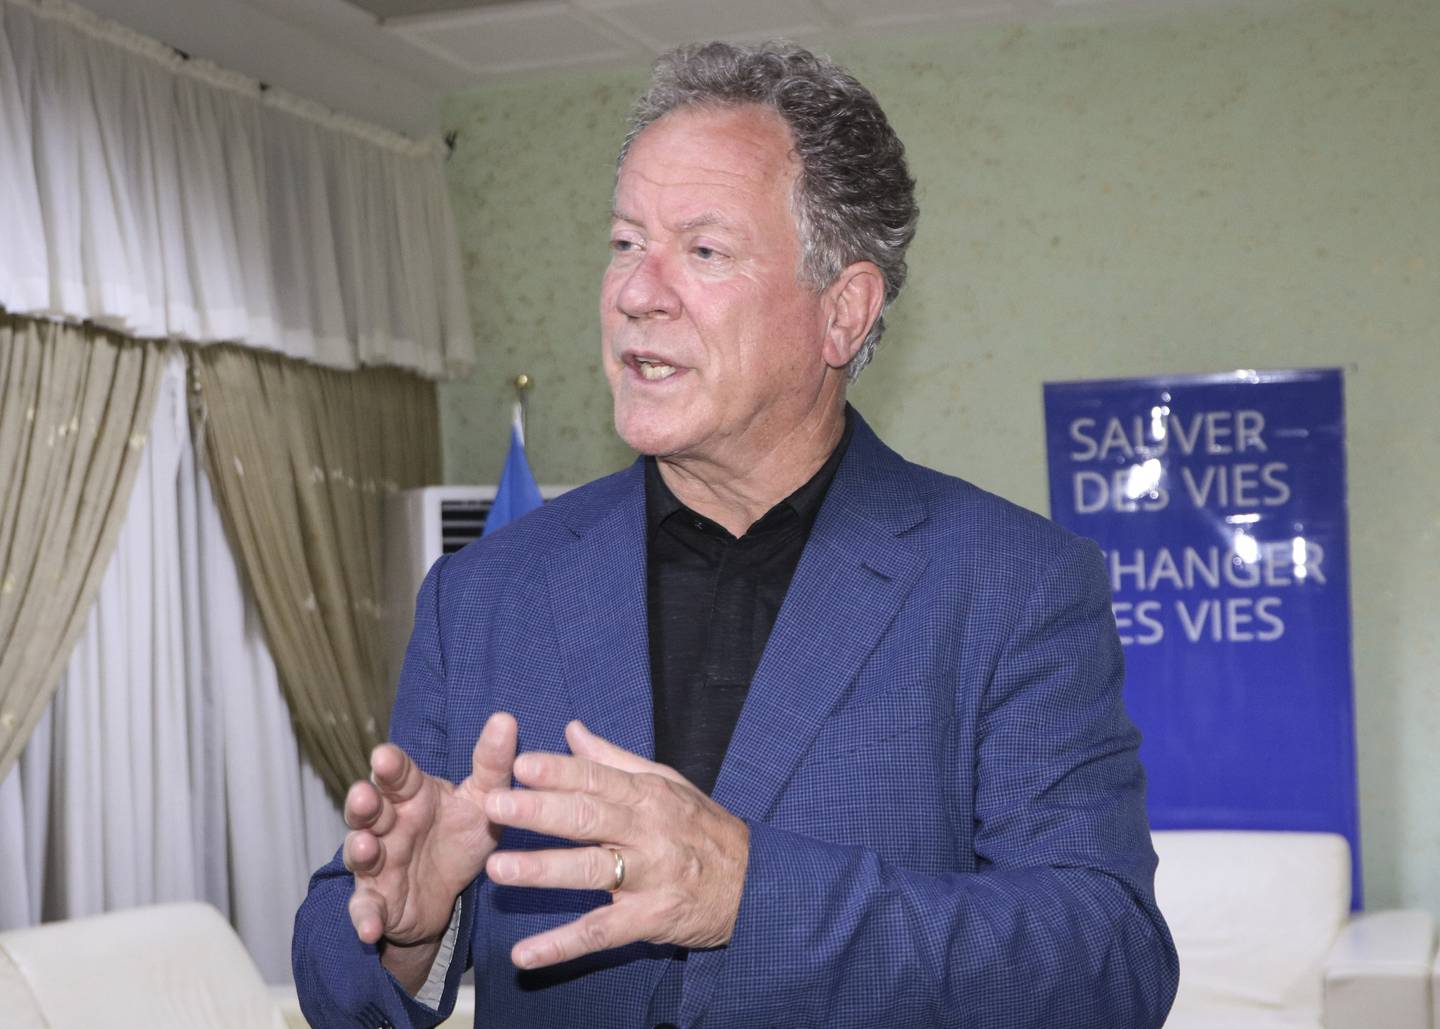 FILE - In this Oct. 9, 2020 file photo, World Food Program (WFP) Executive Director David Beasley speaks to journalists about the organization's Nobel Peace Prize win, at the airport in Ouagadougou, Burkina Faso. After a visit to Yemen Beasly warned that his underfunded organization may be forced seek hundreds of millions of dollars in private donations in a desperate bid to stave off widespread famine in the coming months. Beasley told The Associated Press in an interview Wednesday March 10, 2021, that conditions in war-wrecked Yemen are hell. (AP Photo/Sam Mednick, File)